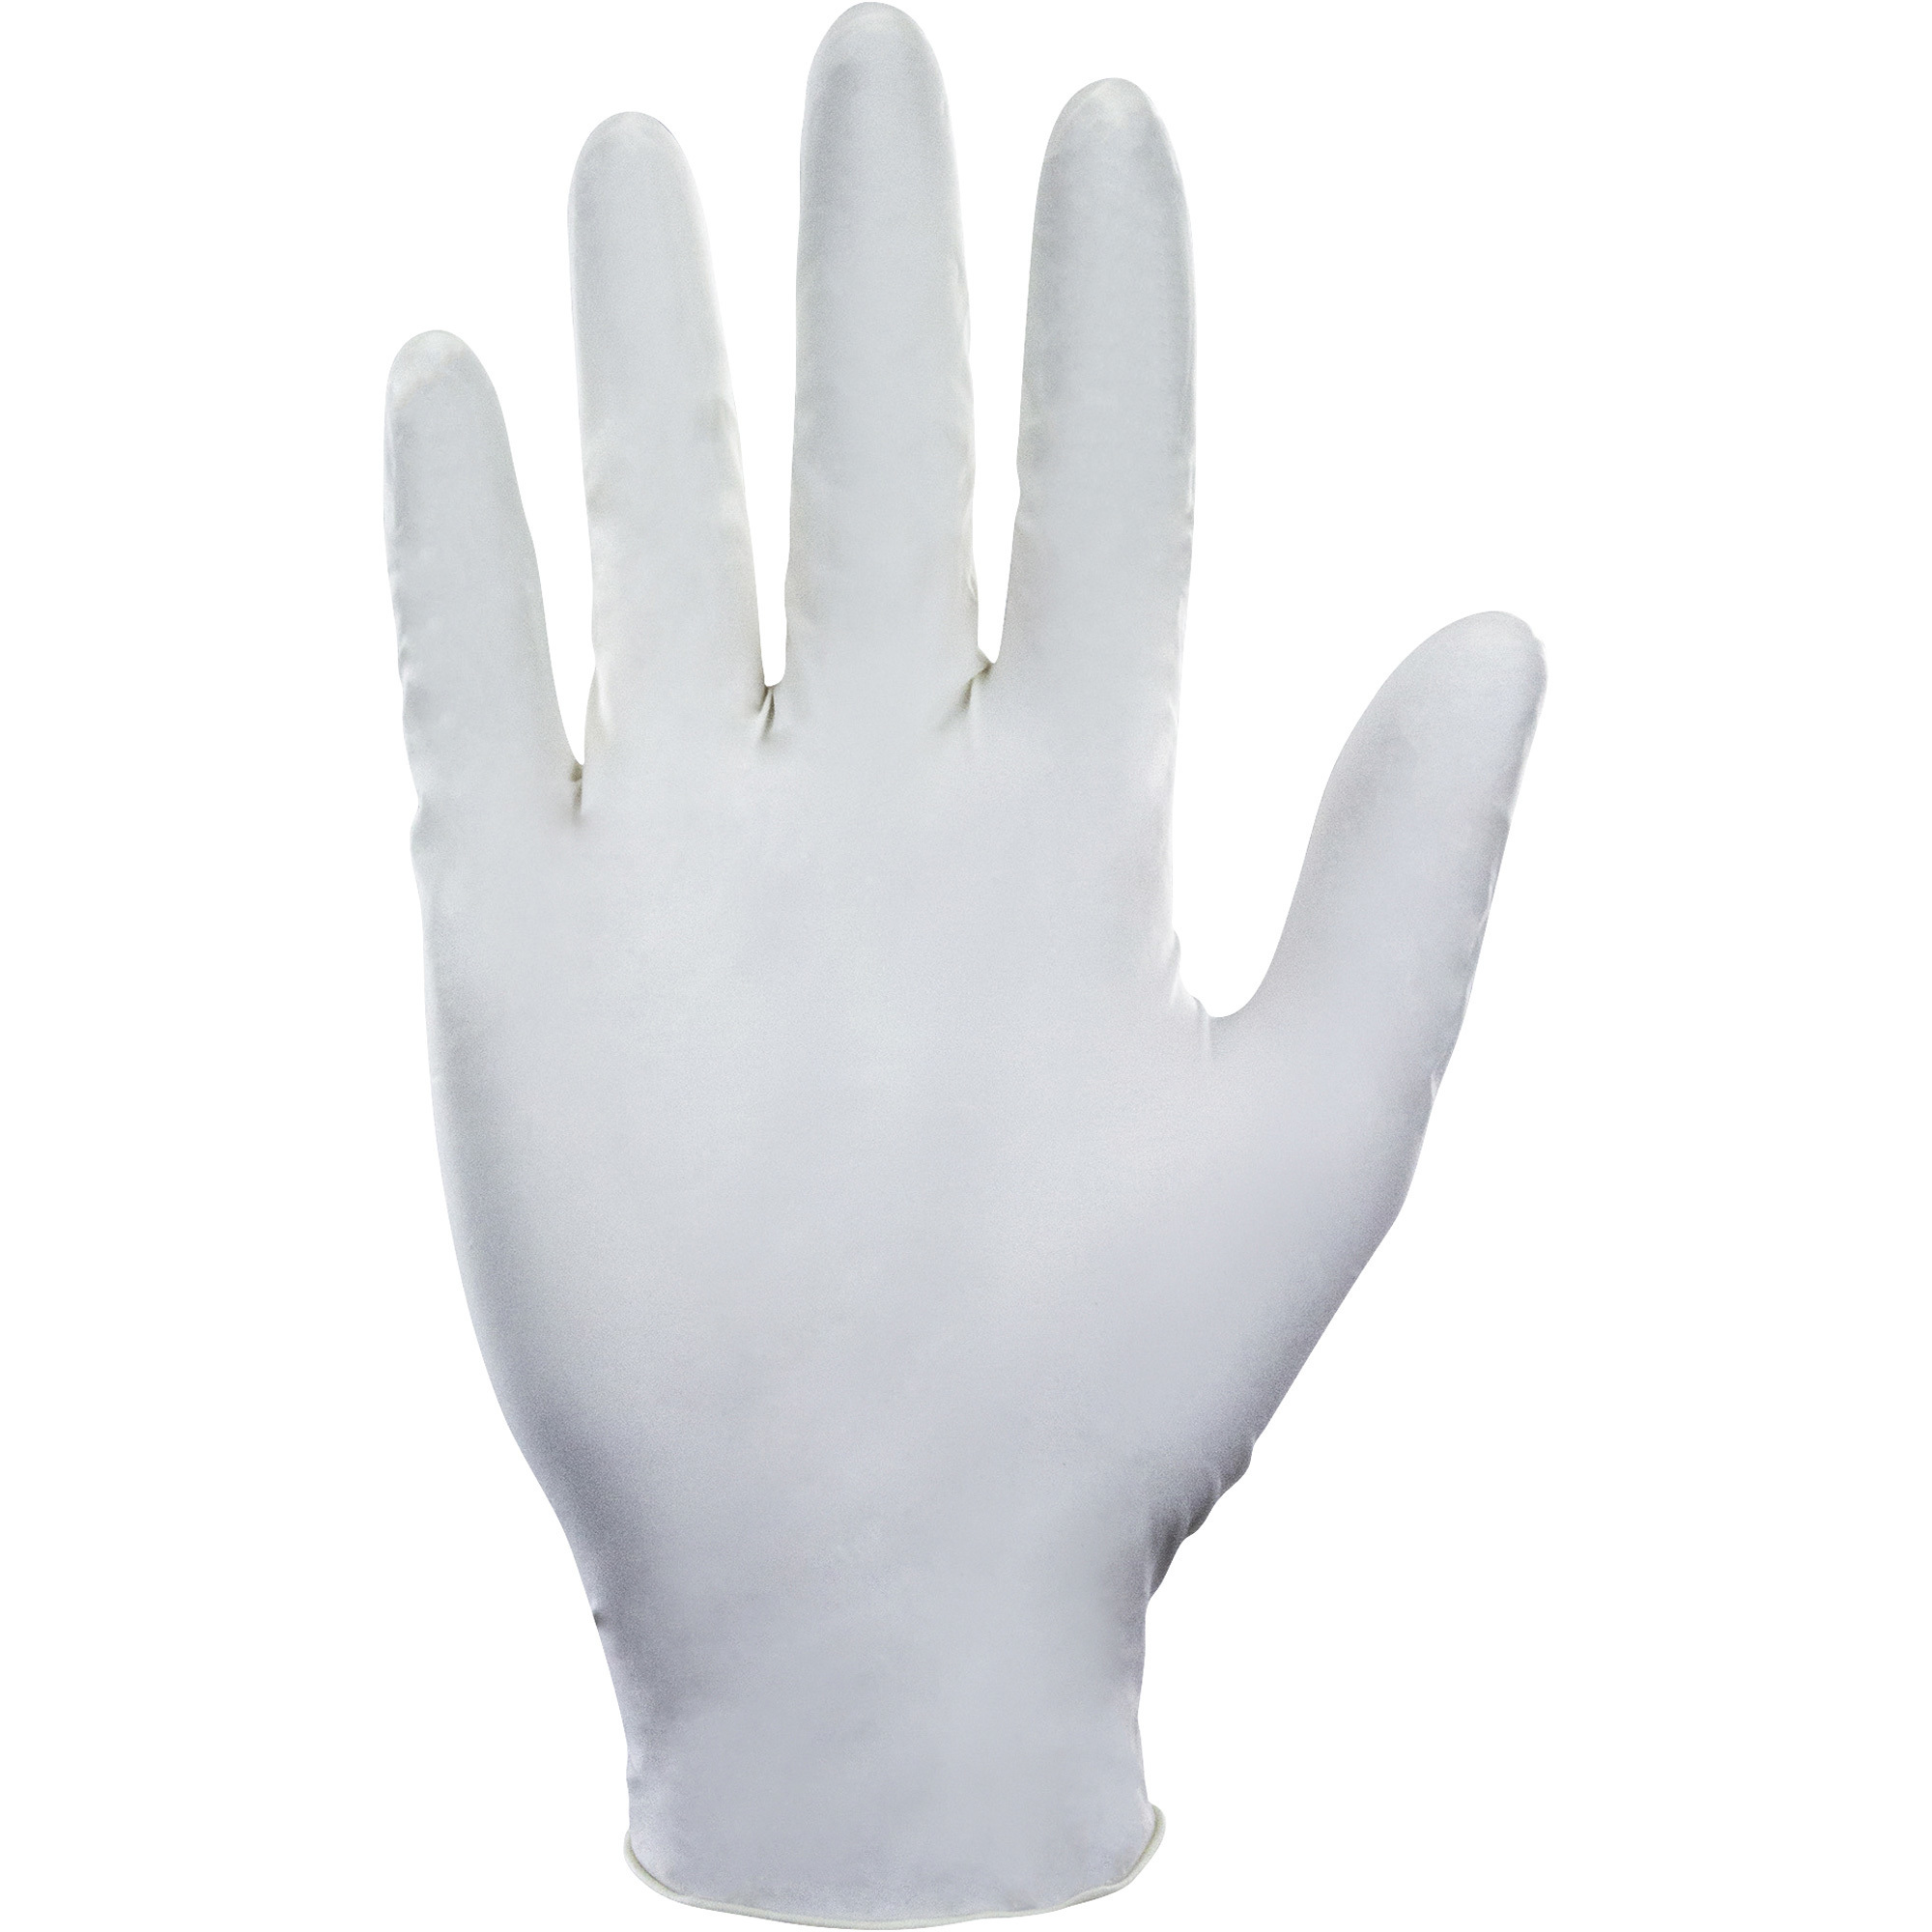 SAS Value-Touch 5 Mil Latex Disposable Gloves, 50 Pairs, White, XL, Model 6593-20